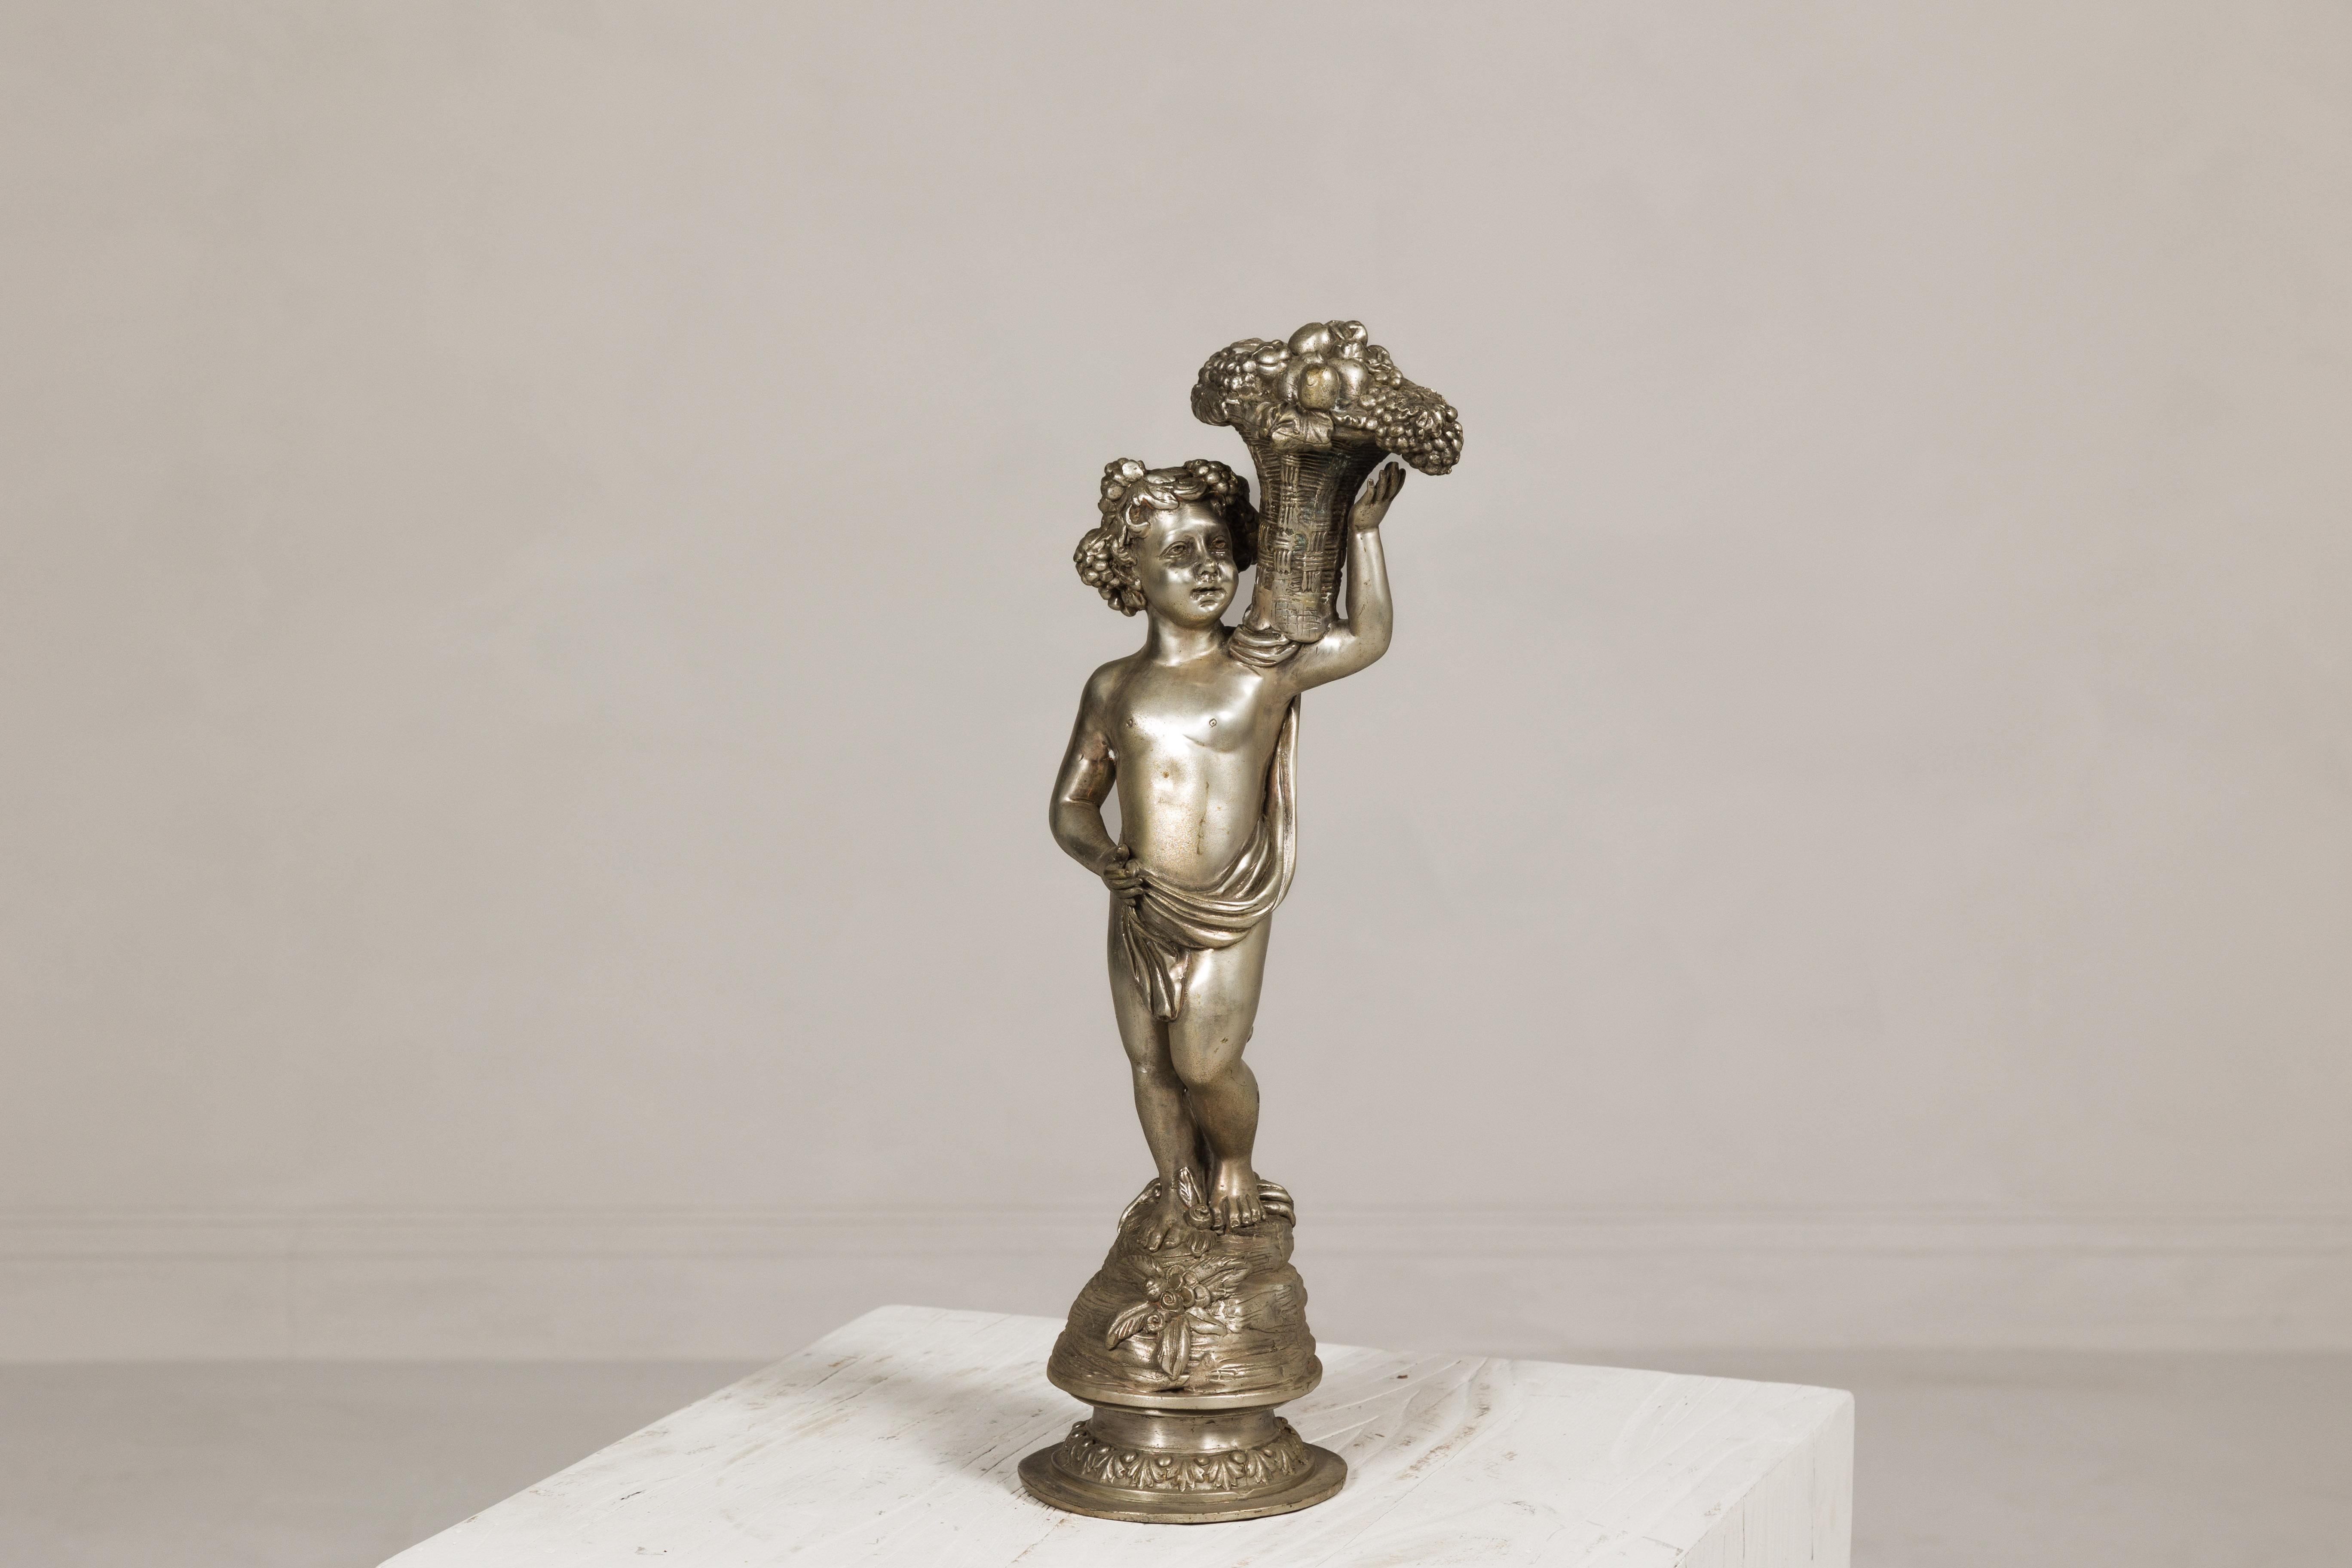 A Baroque style vintage bronze statuette of a putto carrying a wicker fruit basket with silver patina. Inspired by the drama and opulence of the Baroque era, this vintage bronze statuette is an exquisite homage to classical artistry. Depicting a